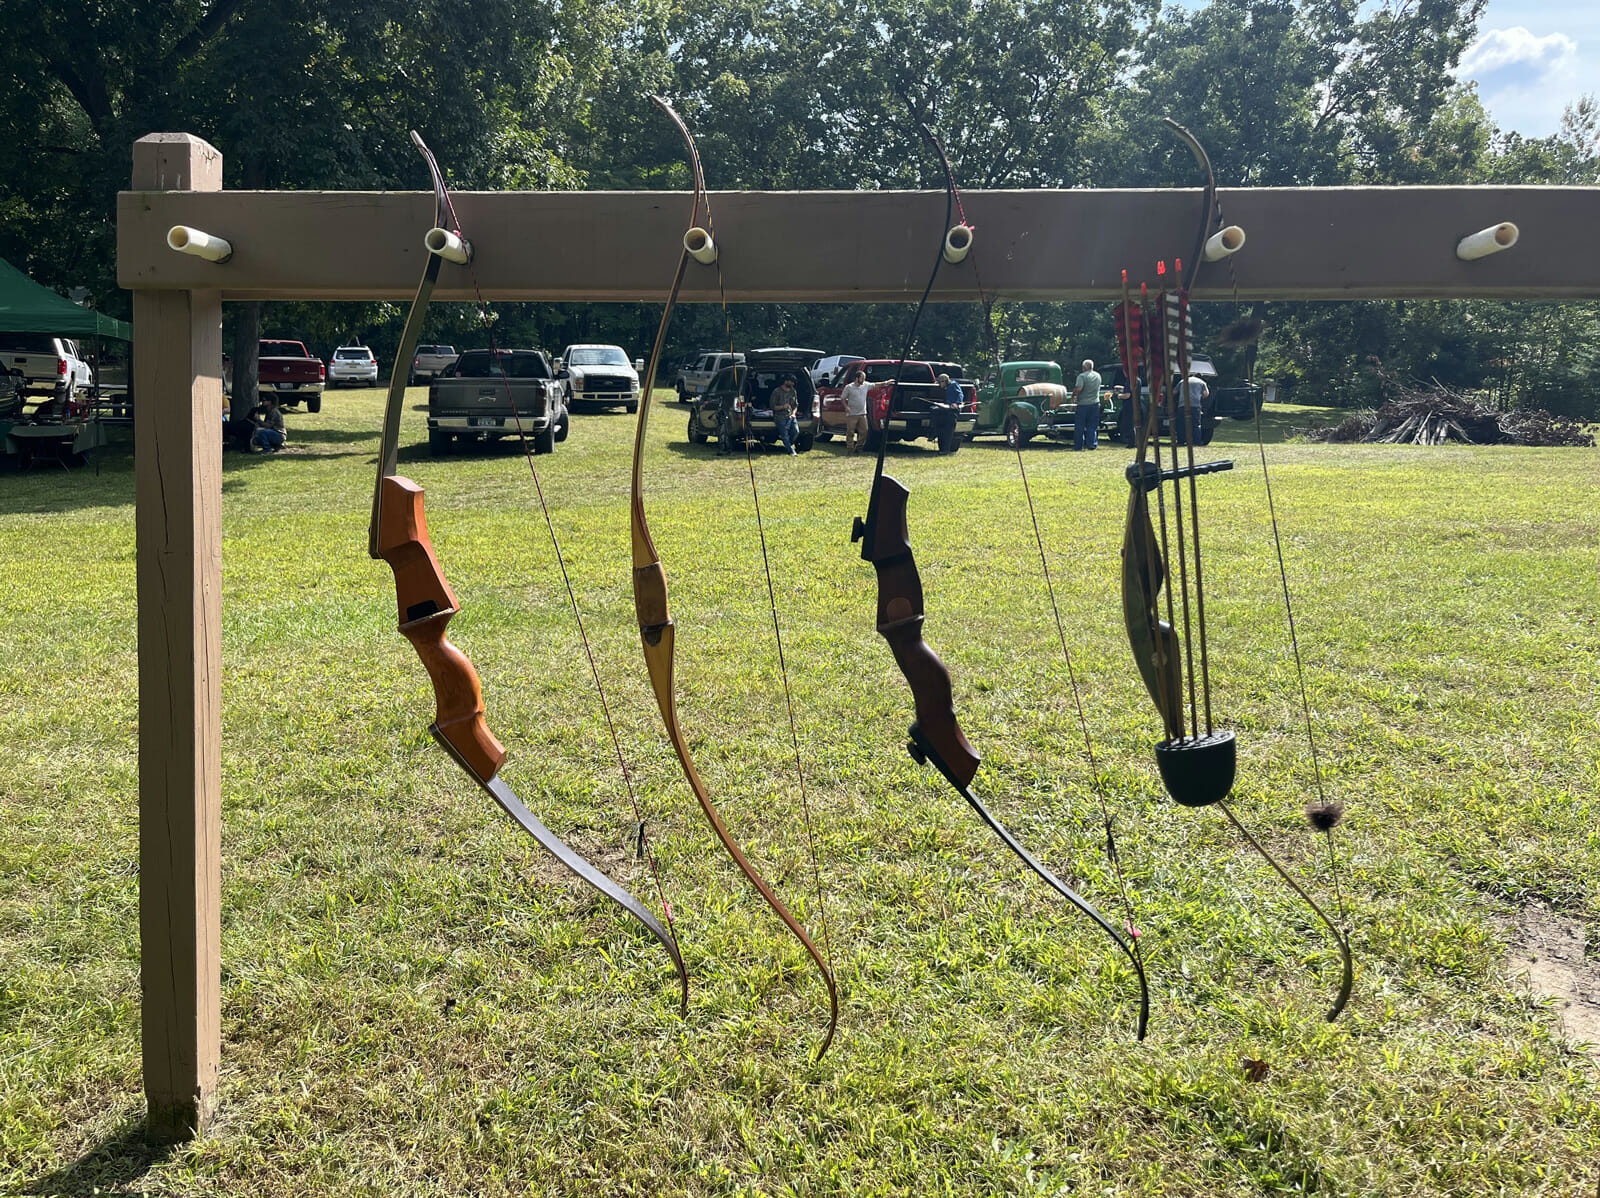 An outdoor rack holding four archery bows